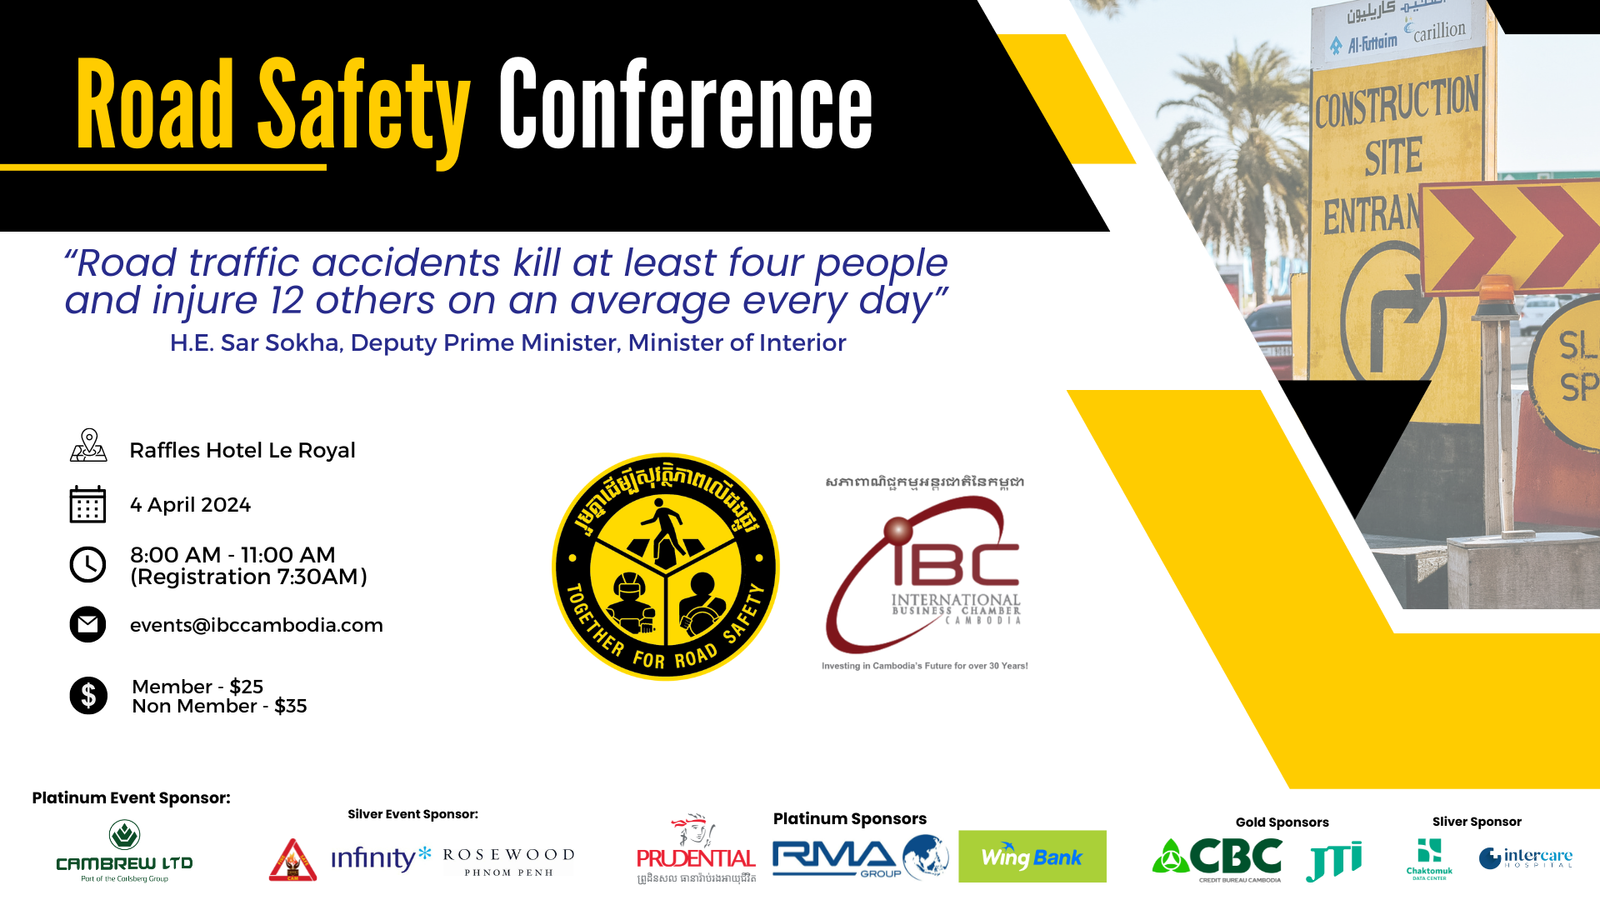 1. Road Safety Conference - FB post